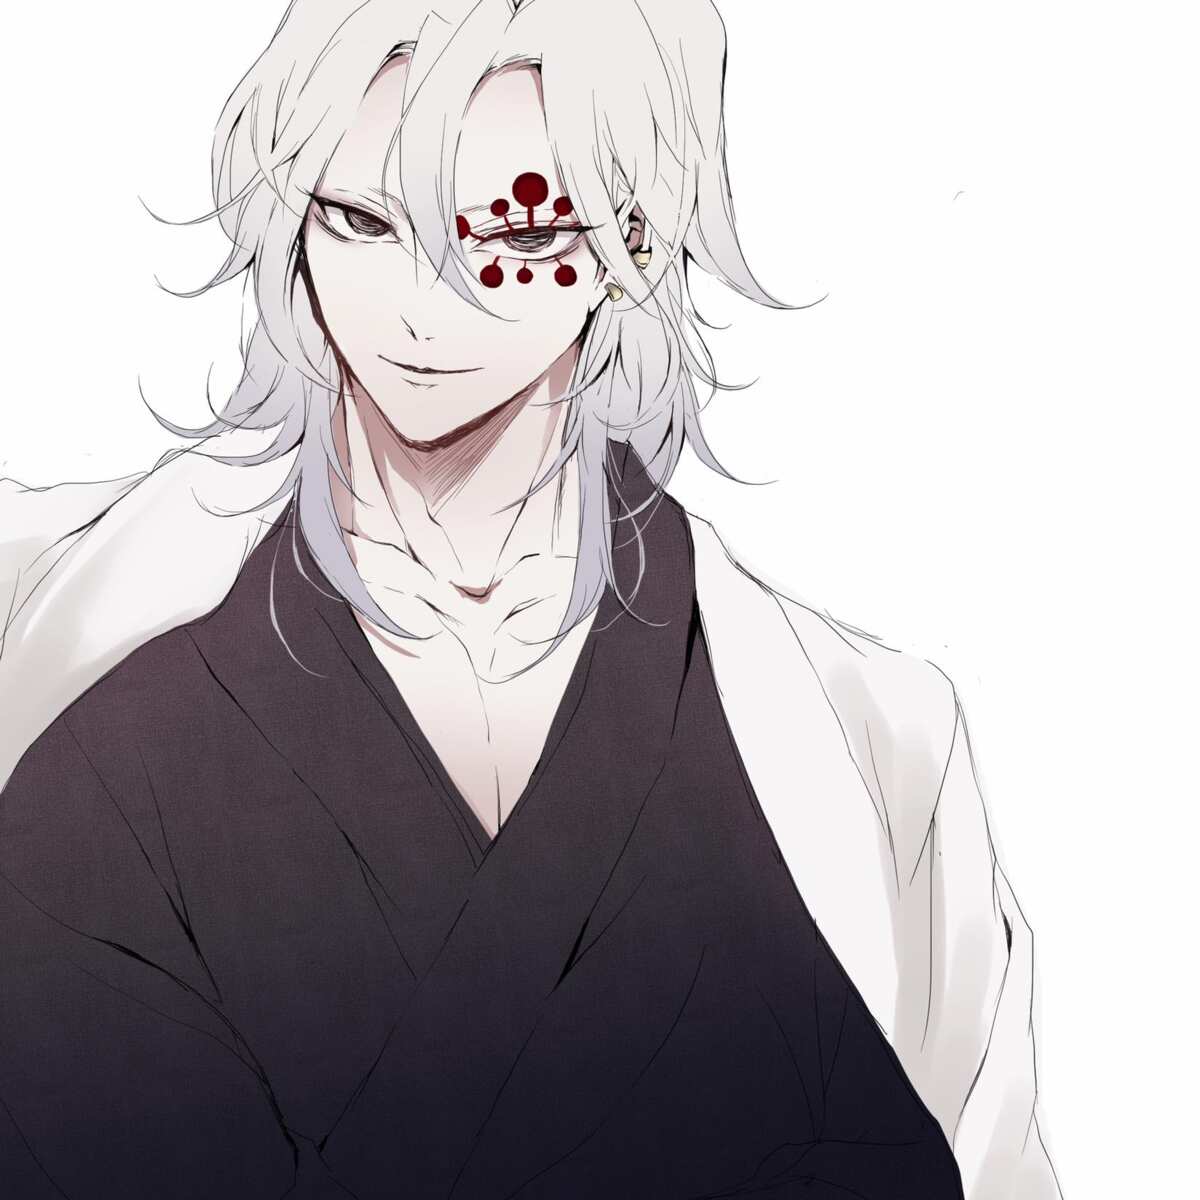 Top 23 Mysterious Anime Boys with White Hair and Red Eyes  i need anime